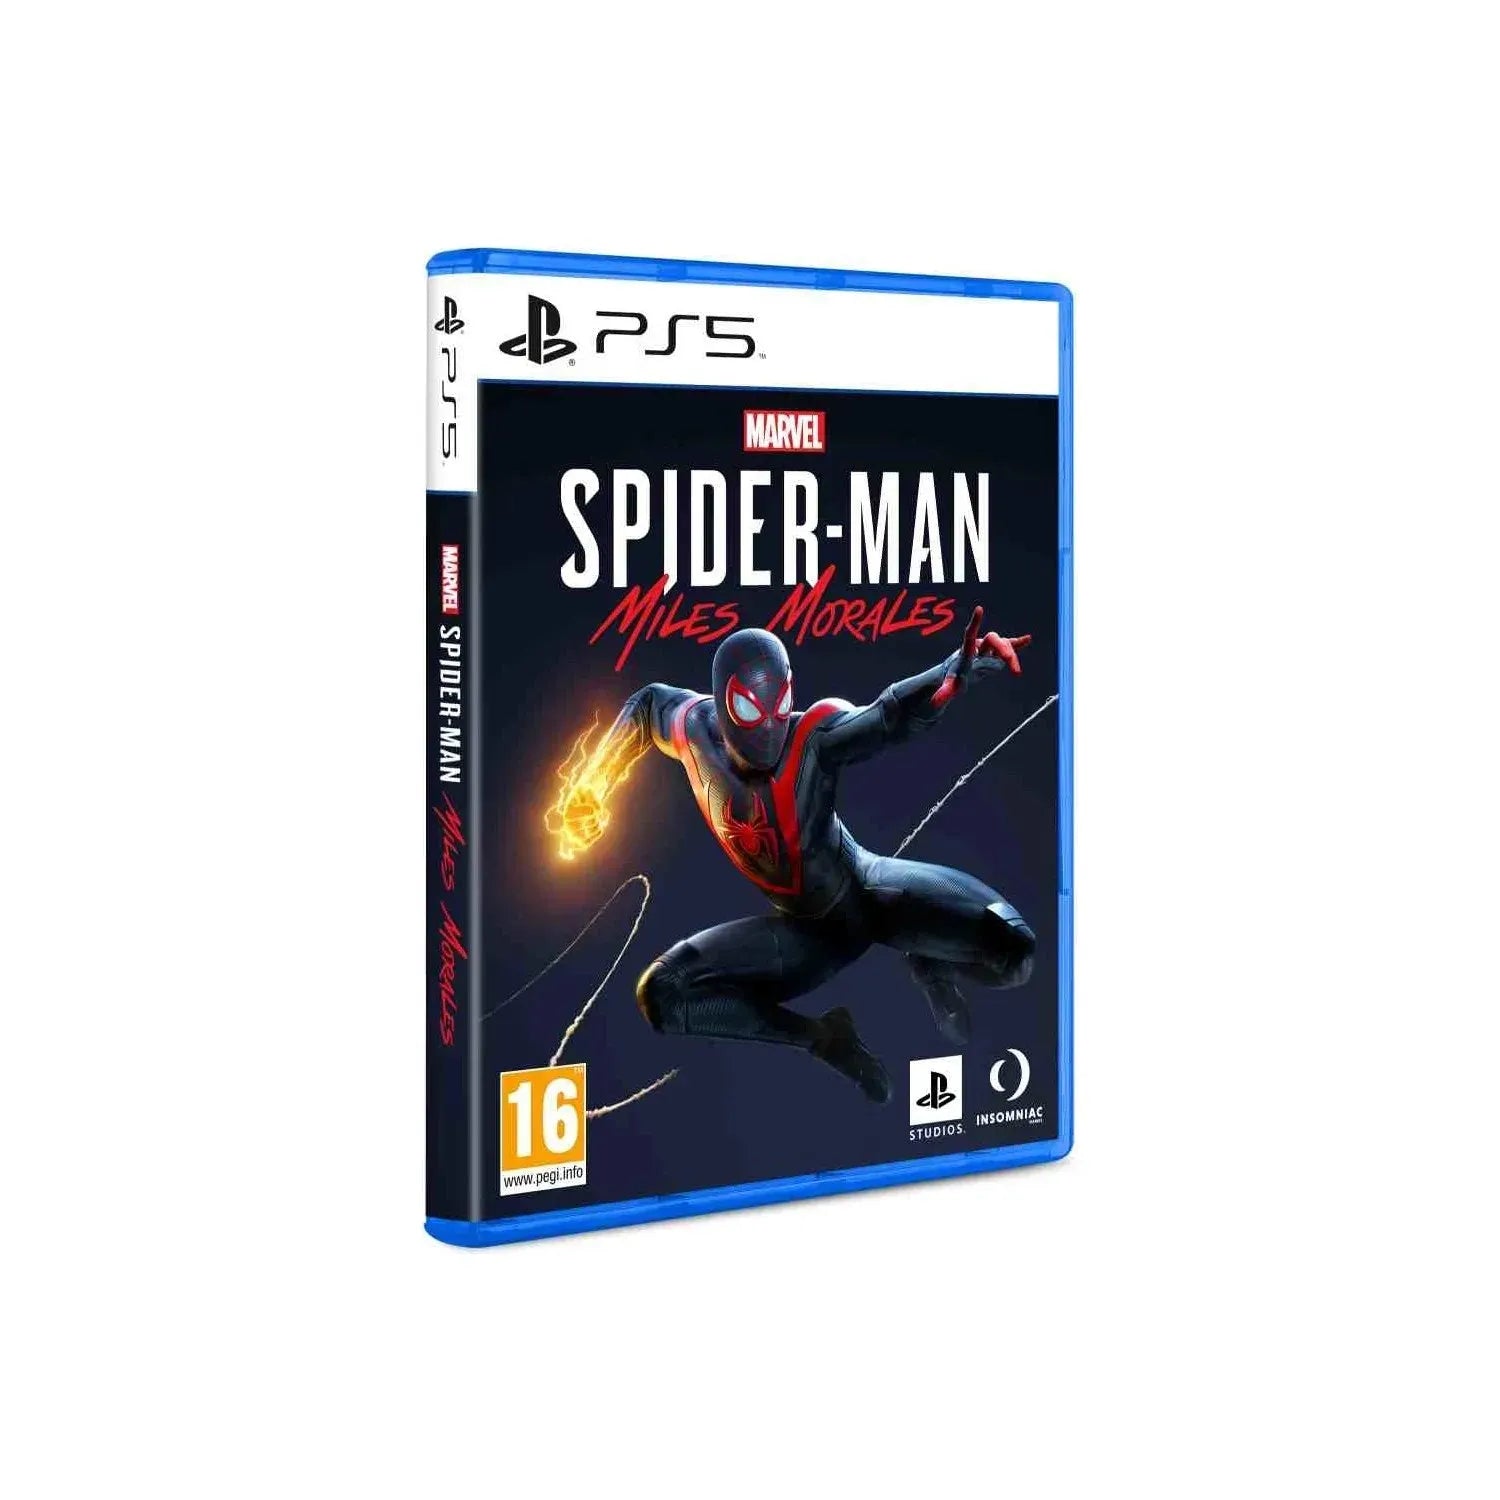 Spiderman Miles Morales PS5 Game Original  Closed Box with Security Strip Fast Delivery